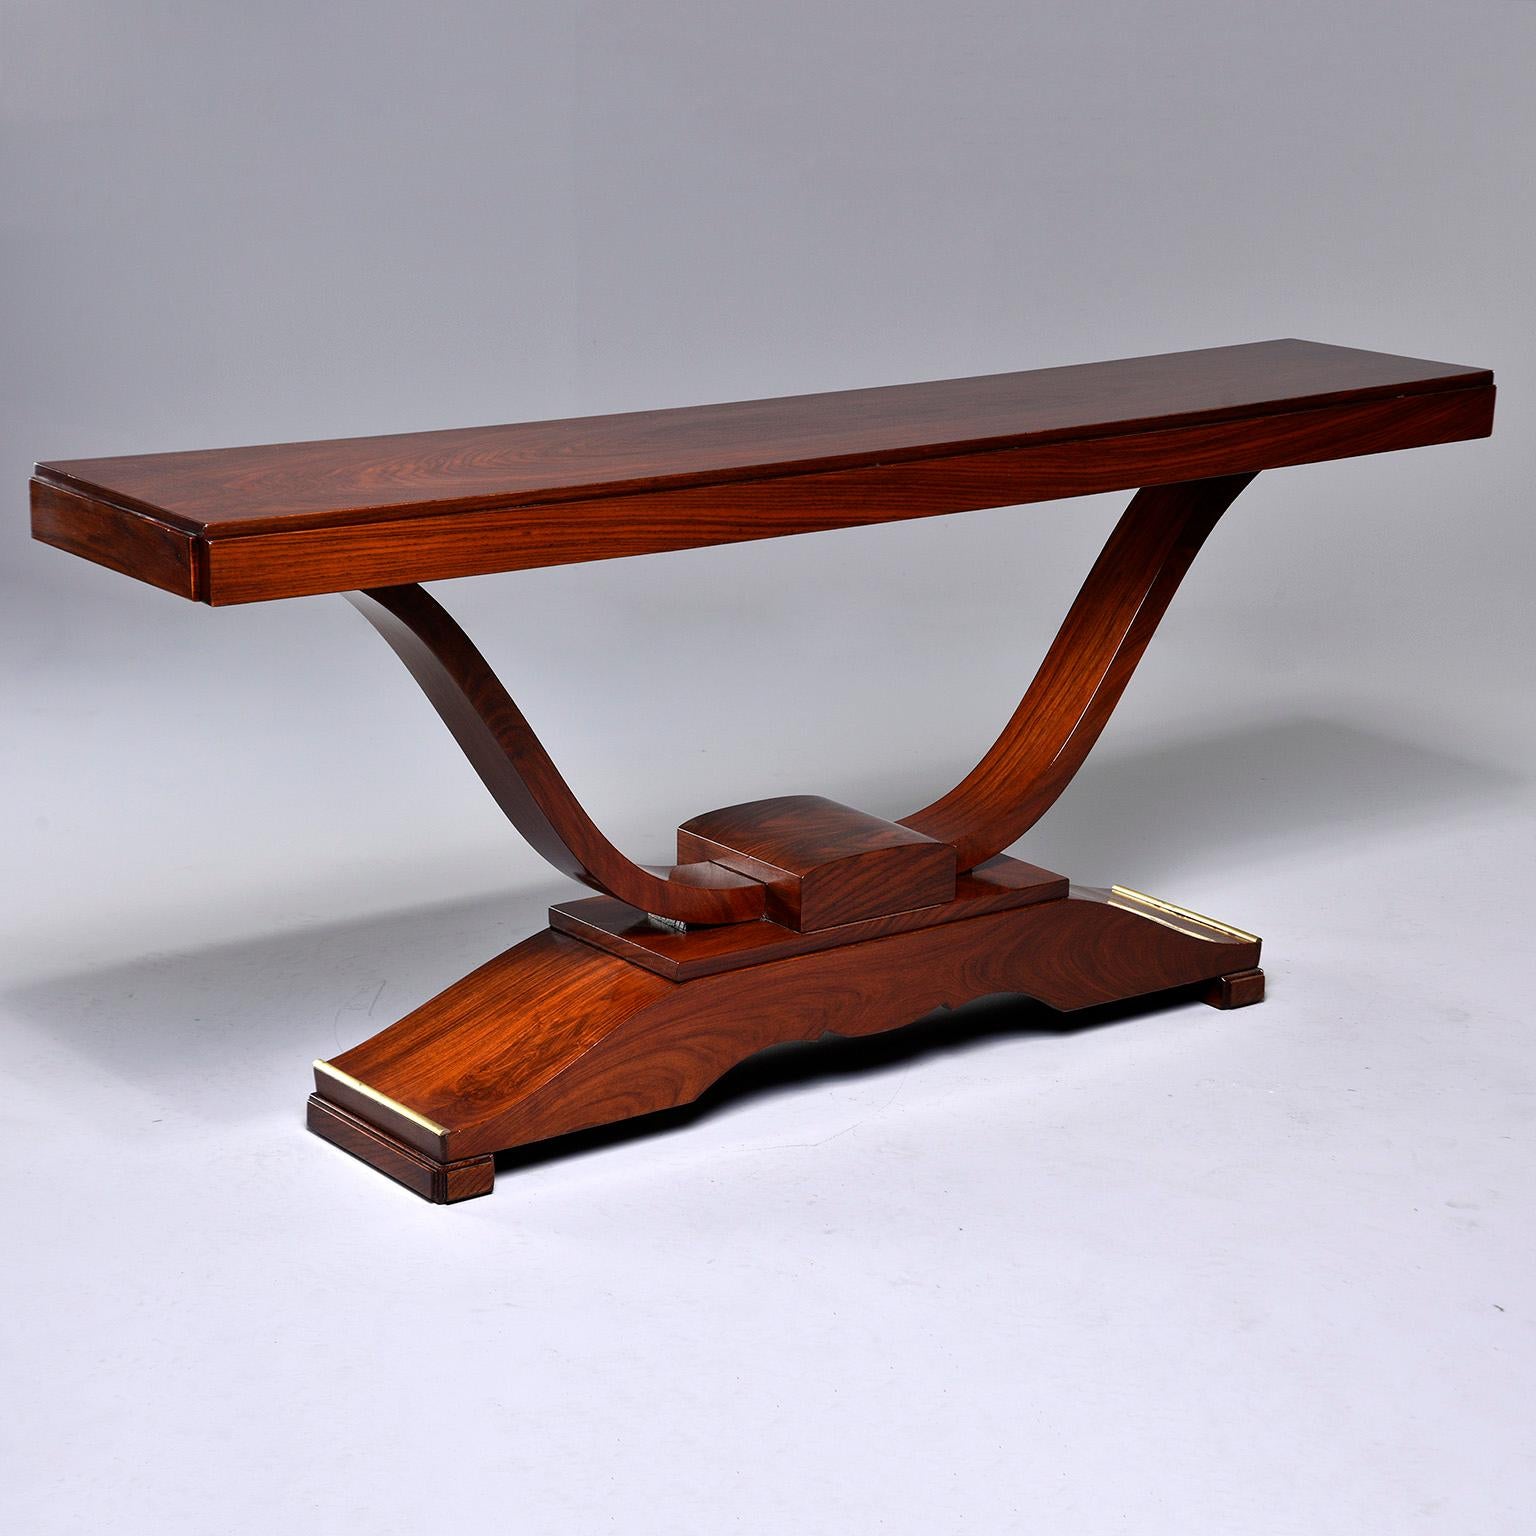 French mahogany console was originally a dining table, but we had the top reduced to be used as a console, circa 1930s. Extra large at just under six feet wide, this is a great piece for a home with larger scale rooms. Classic Art Deco lines, and